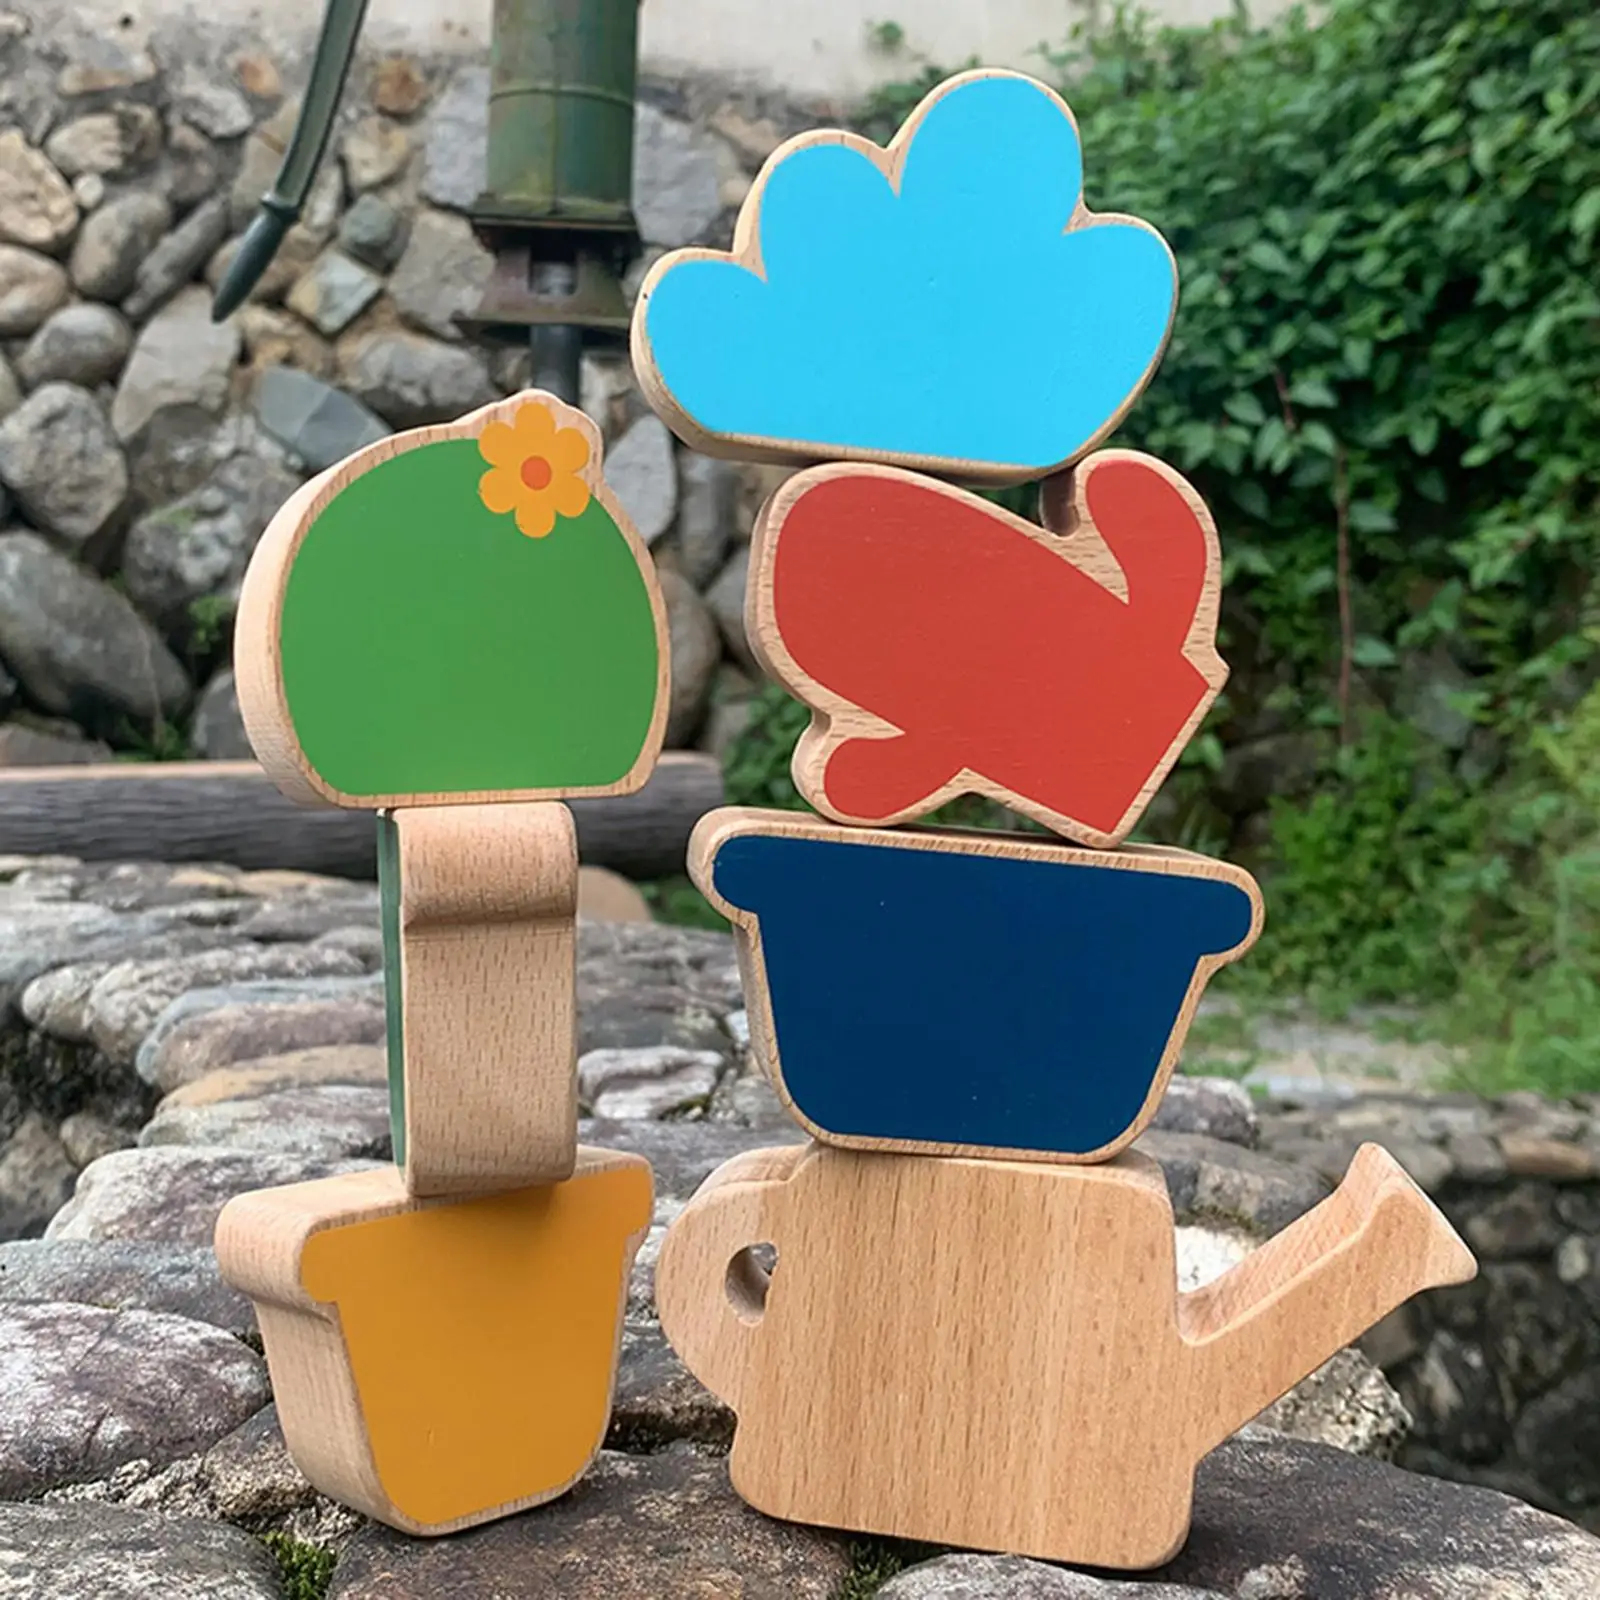 7 Pieces Wooden Potted Balance Blocks Preschool Learning Board Games for Boys Girls